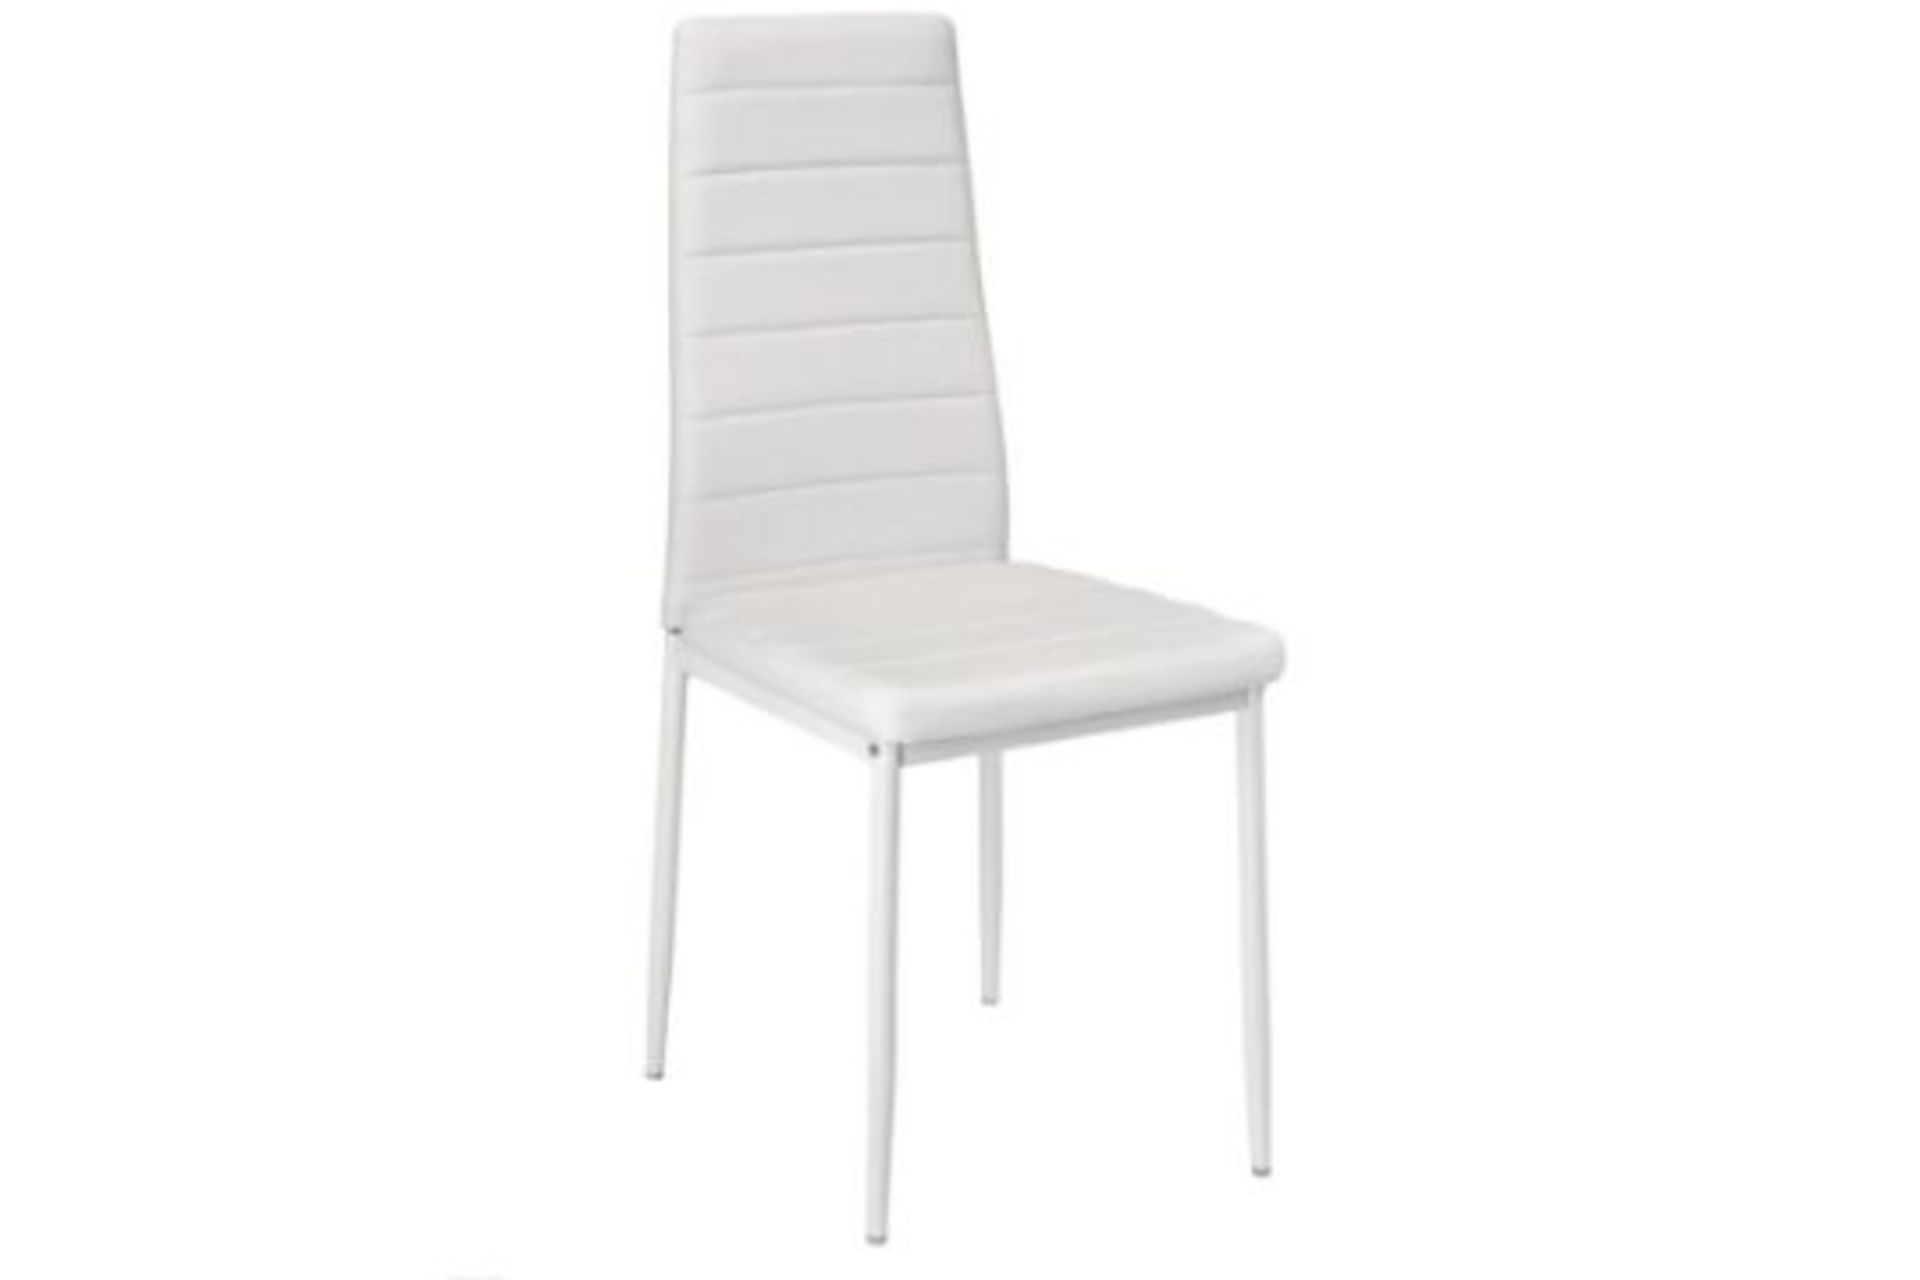 4 X NEW BOXED Modern Synthetic Leather Dining Chairs In White. RRP £99.99 each, giving this lot a